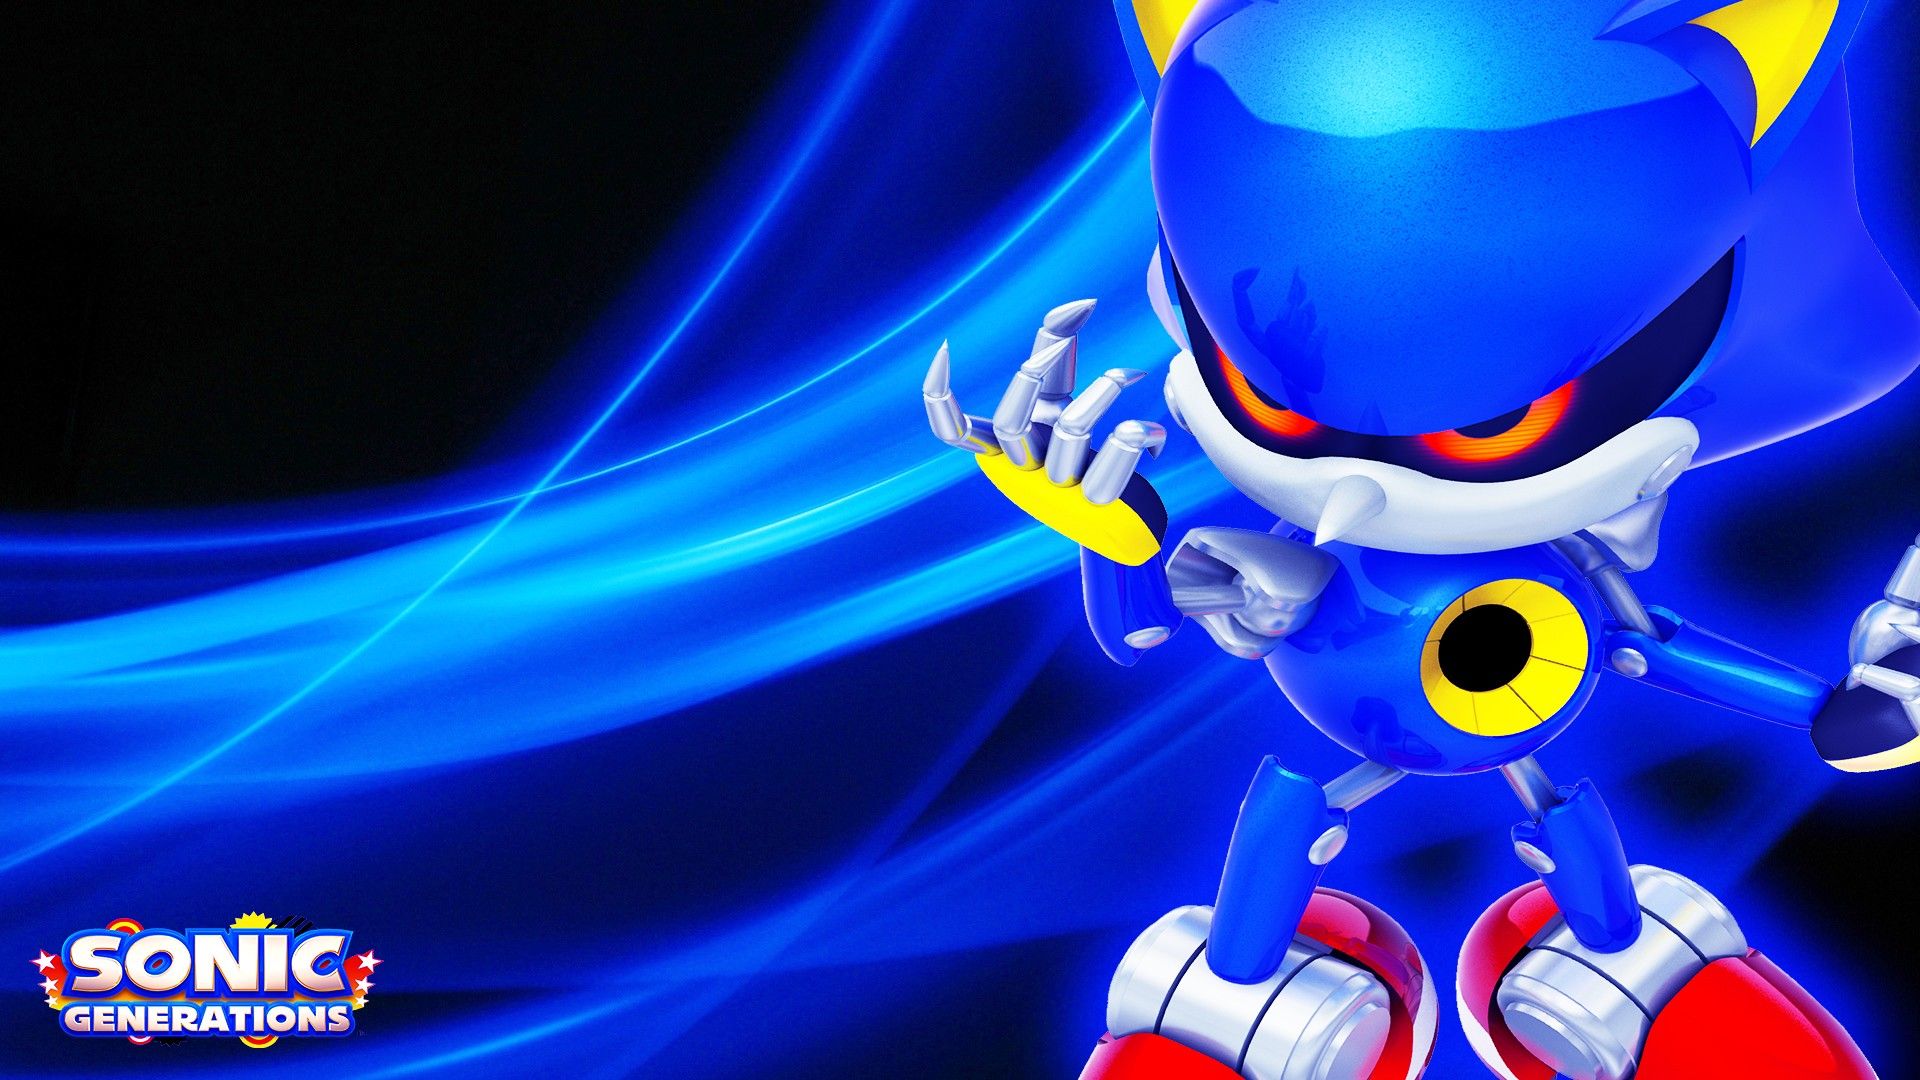 Sonic Background for Computer. Mario